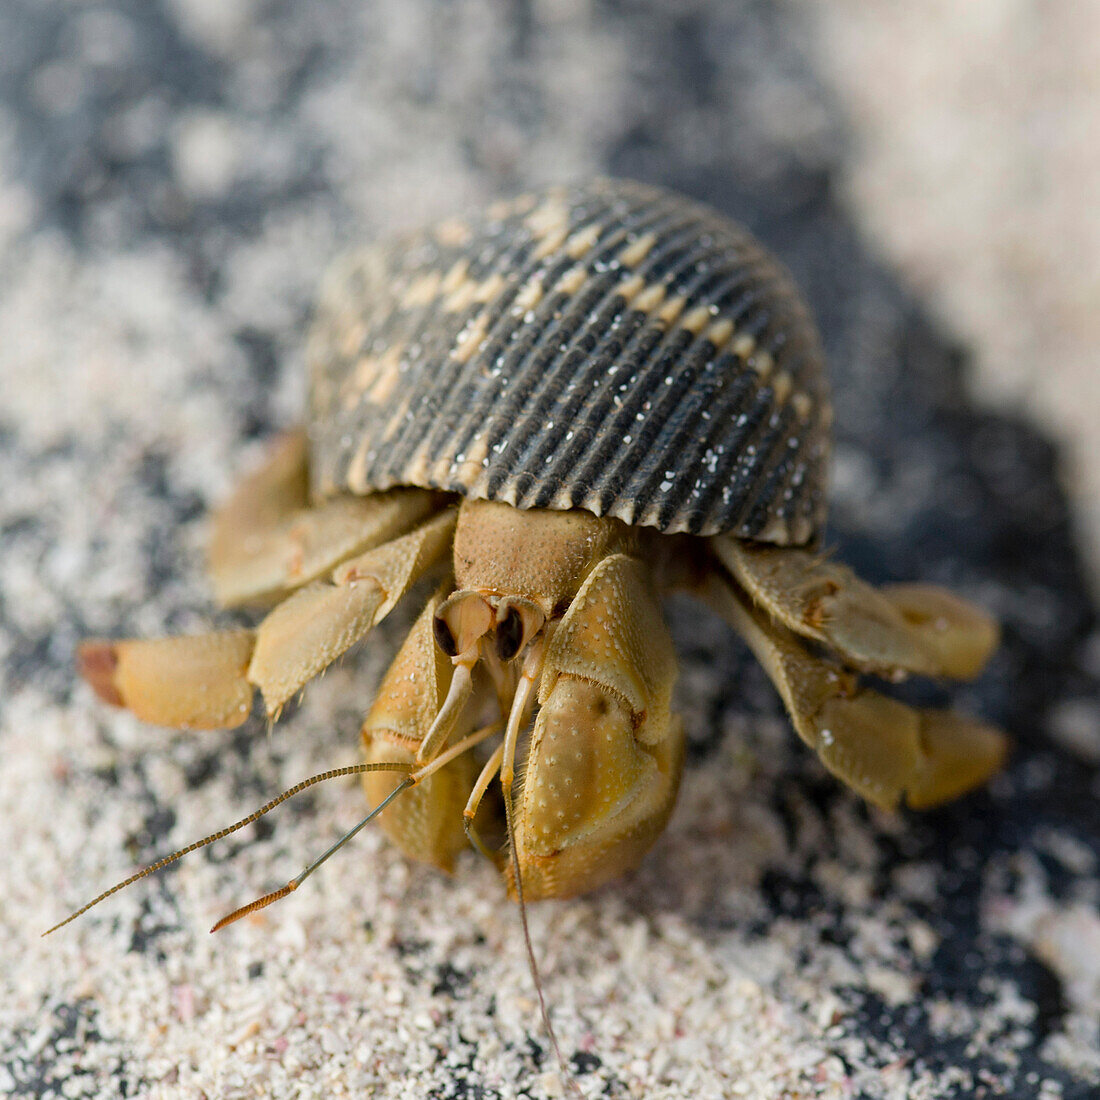 'A Snail Coming Out A It's Shell On The Sand; Galapagos, Equador'